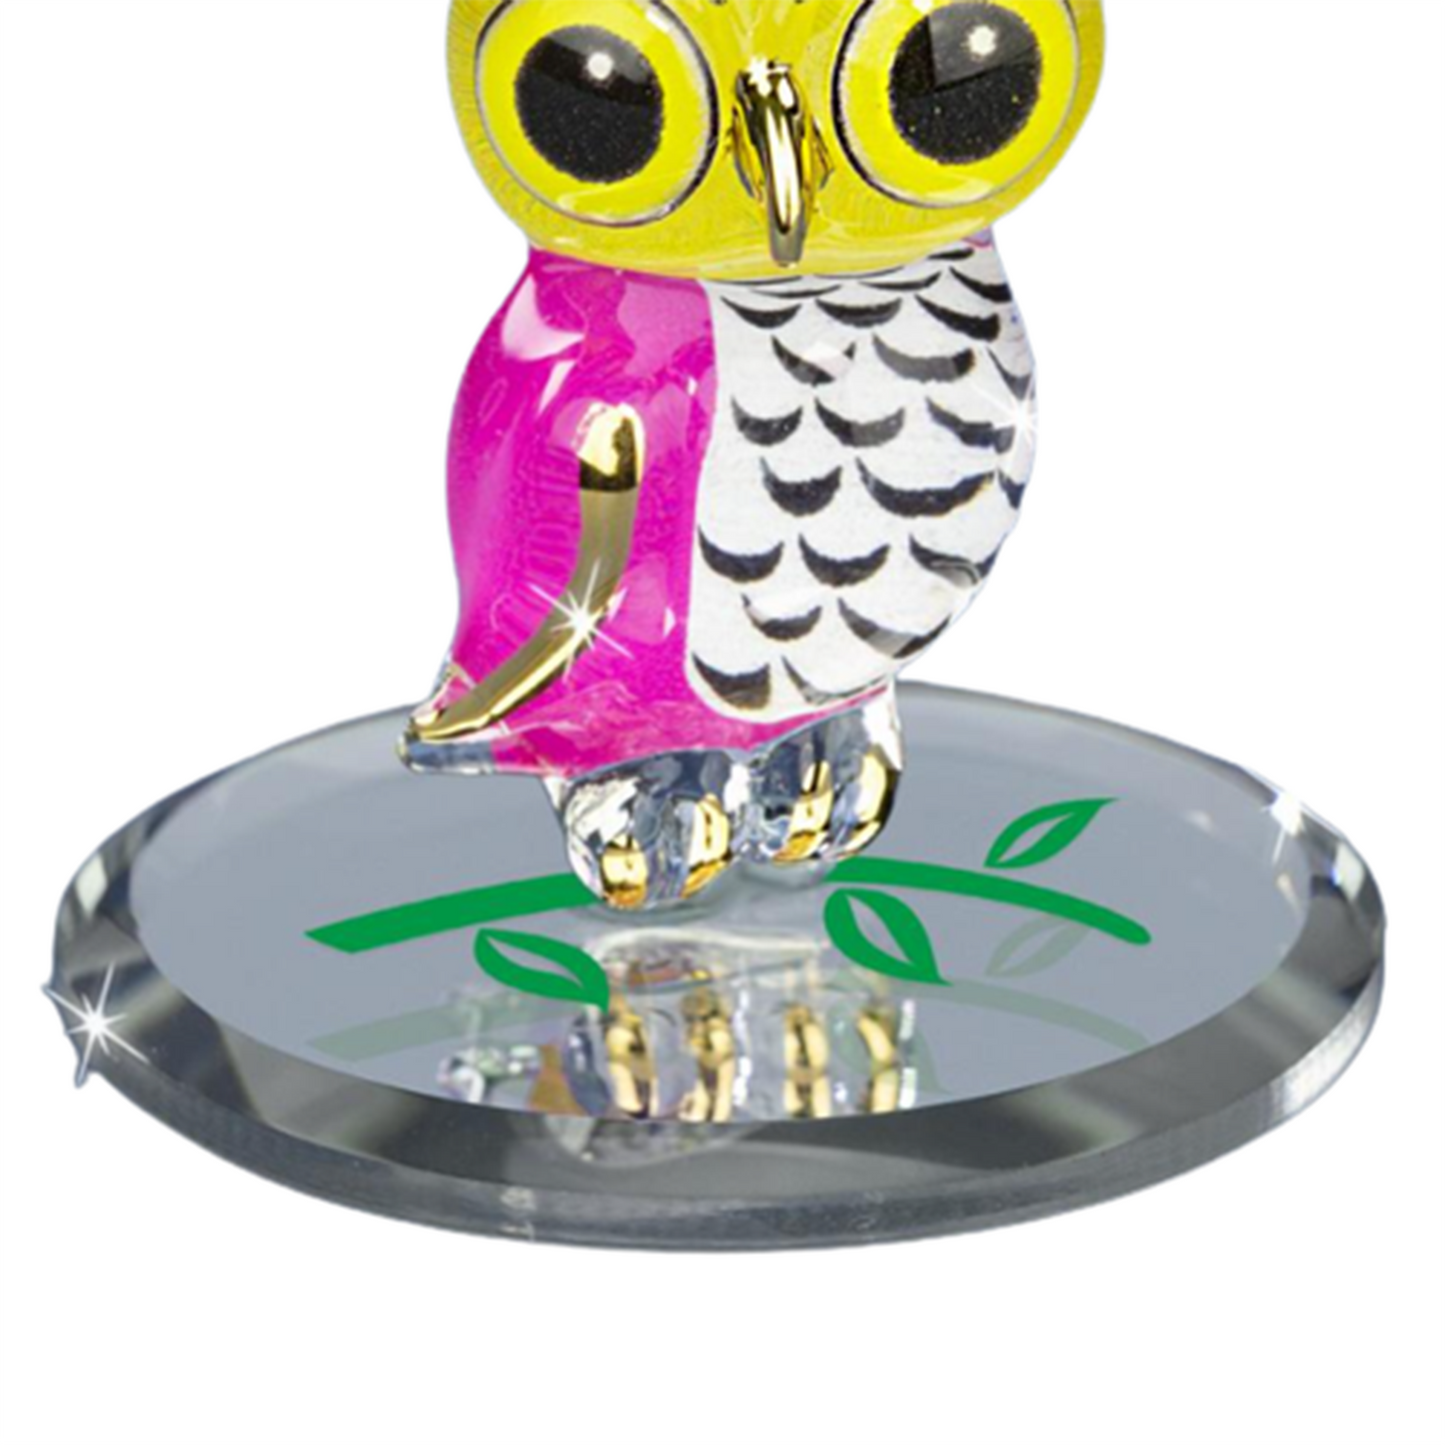 Glass Owl Owlet Statue Collectible Figurine with 22kt Gold Accents